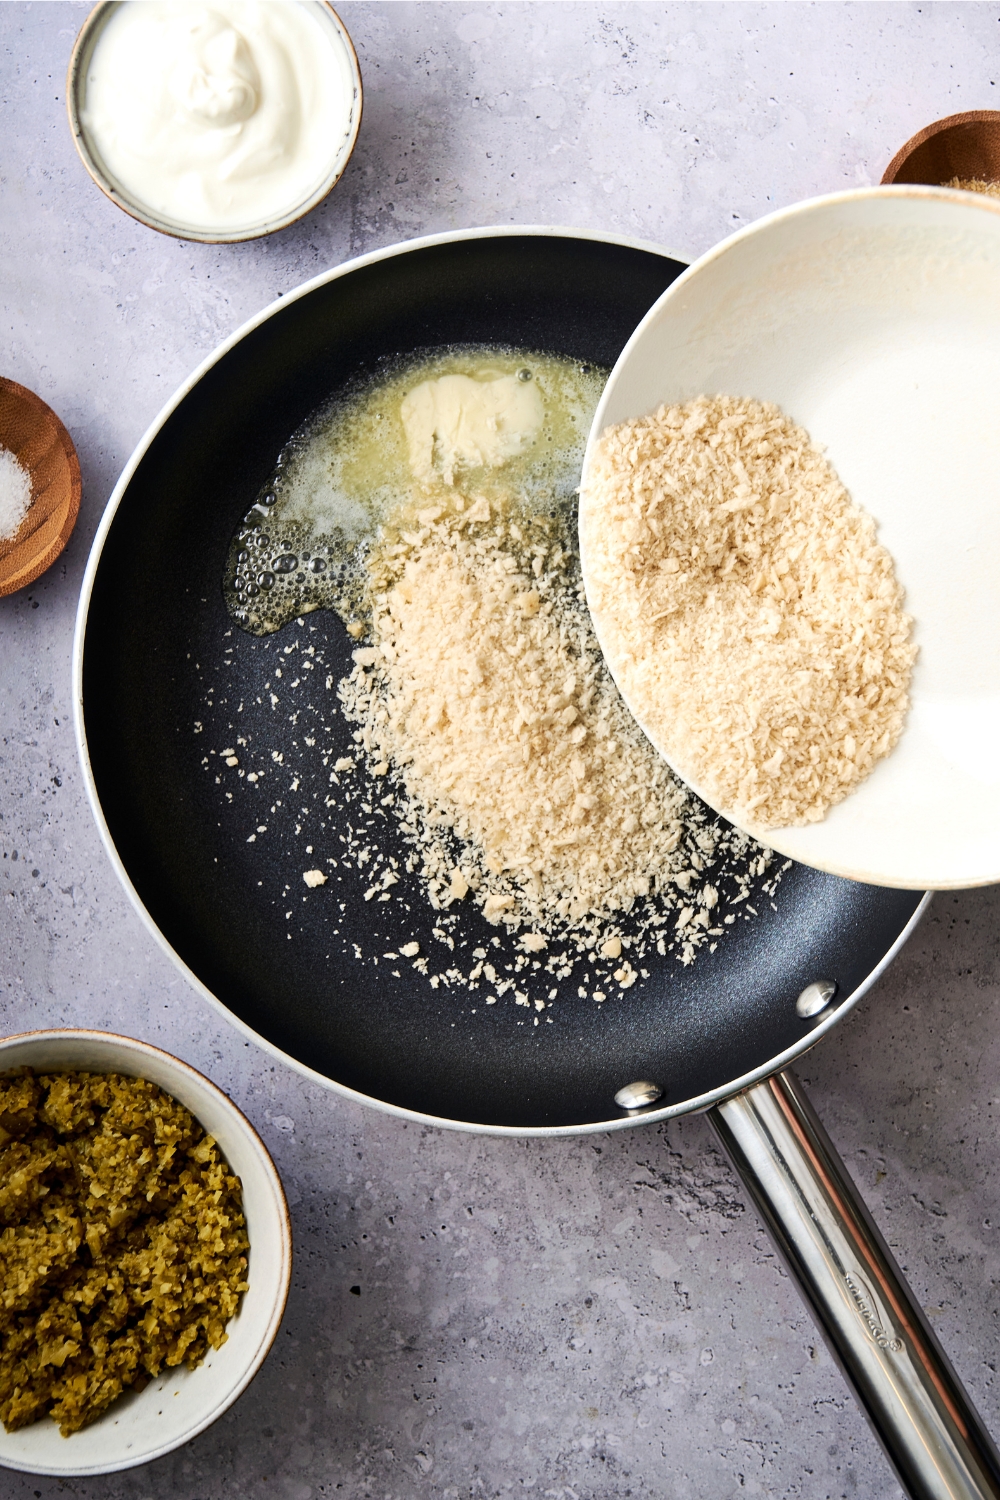 A frying pan with melted butter and panko bread crumbs being added to it.